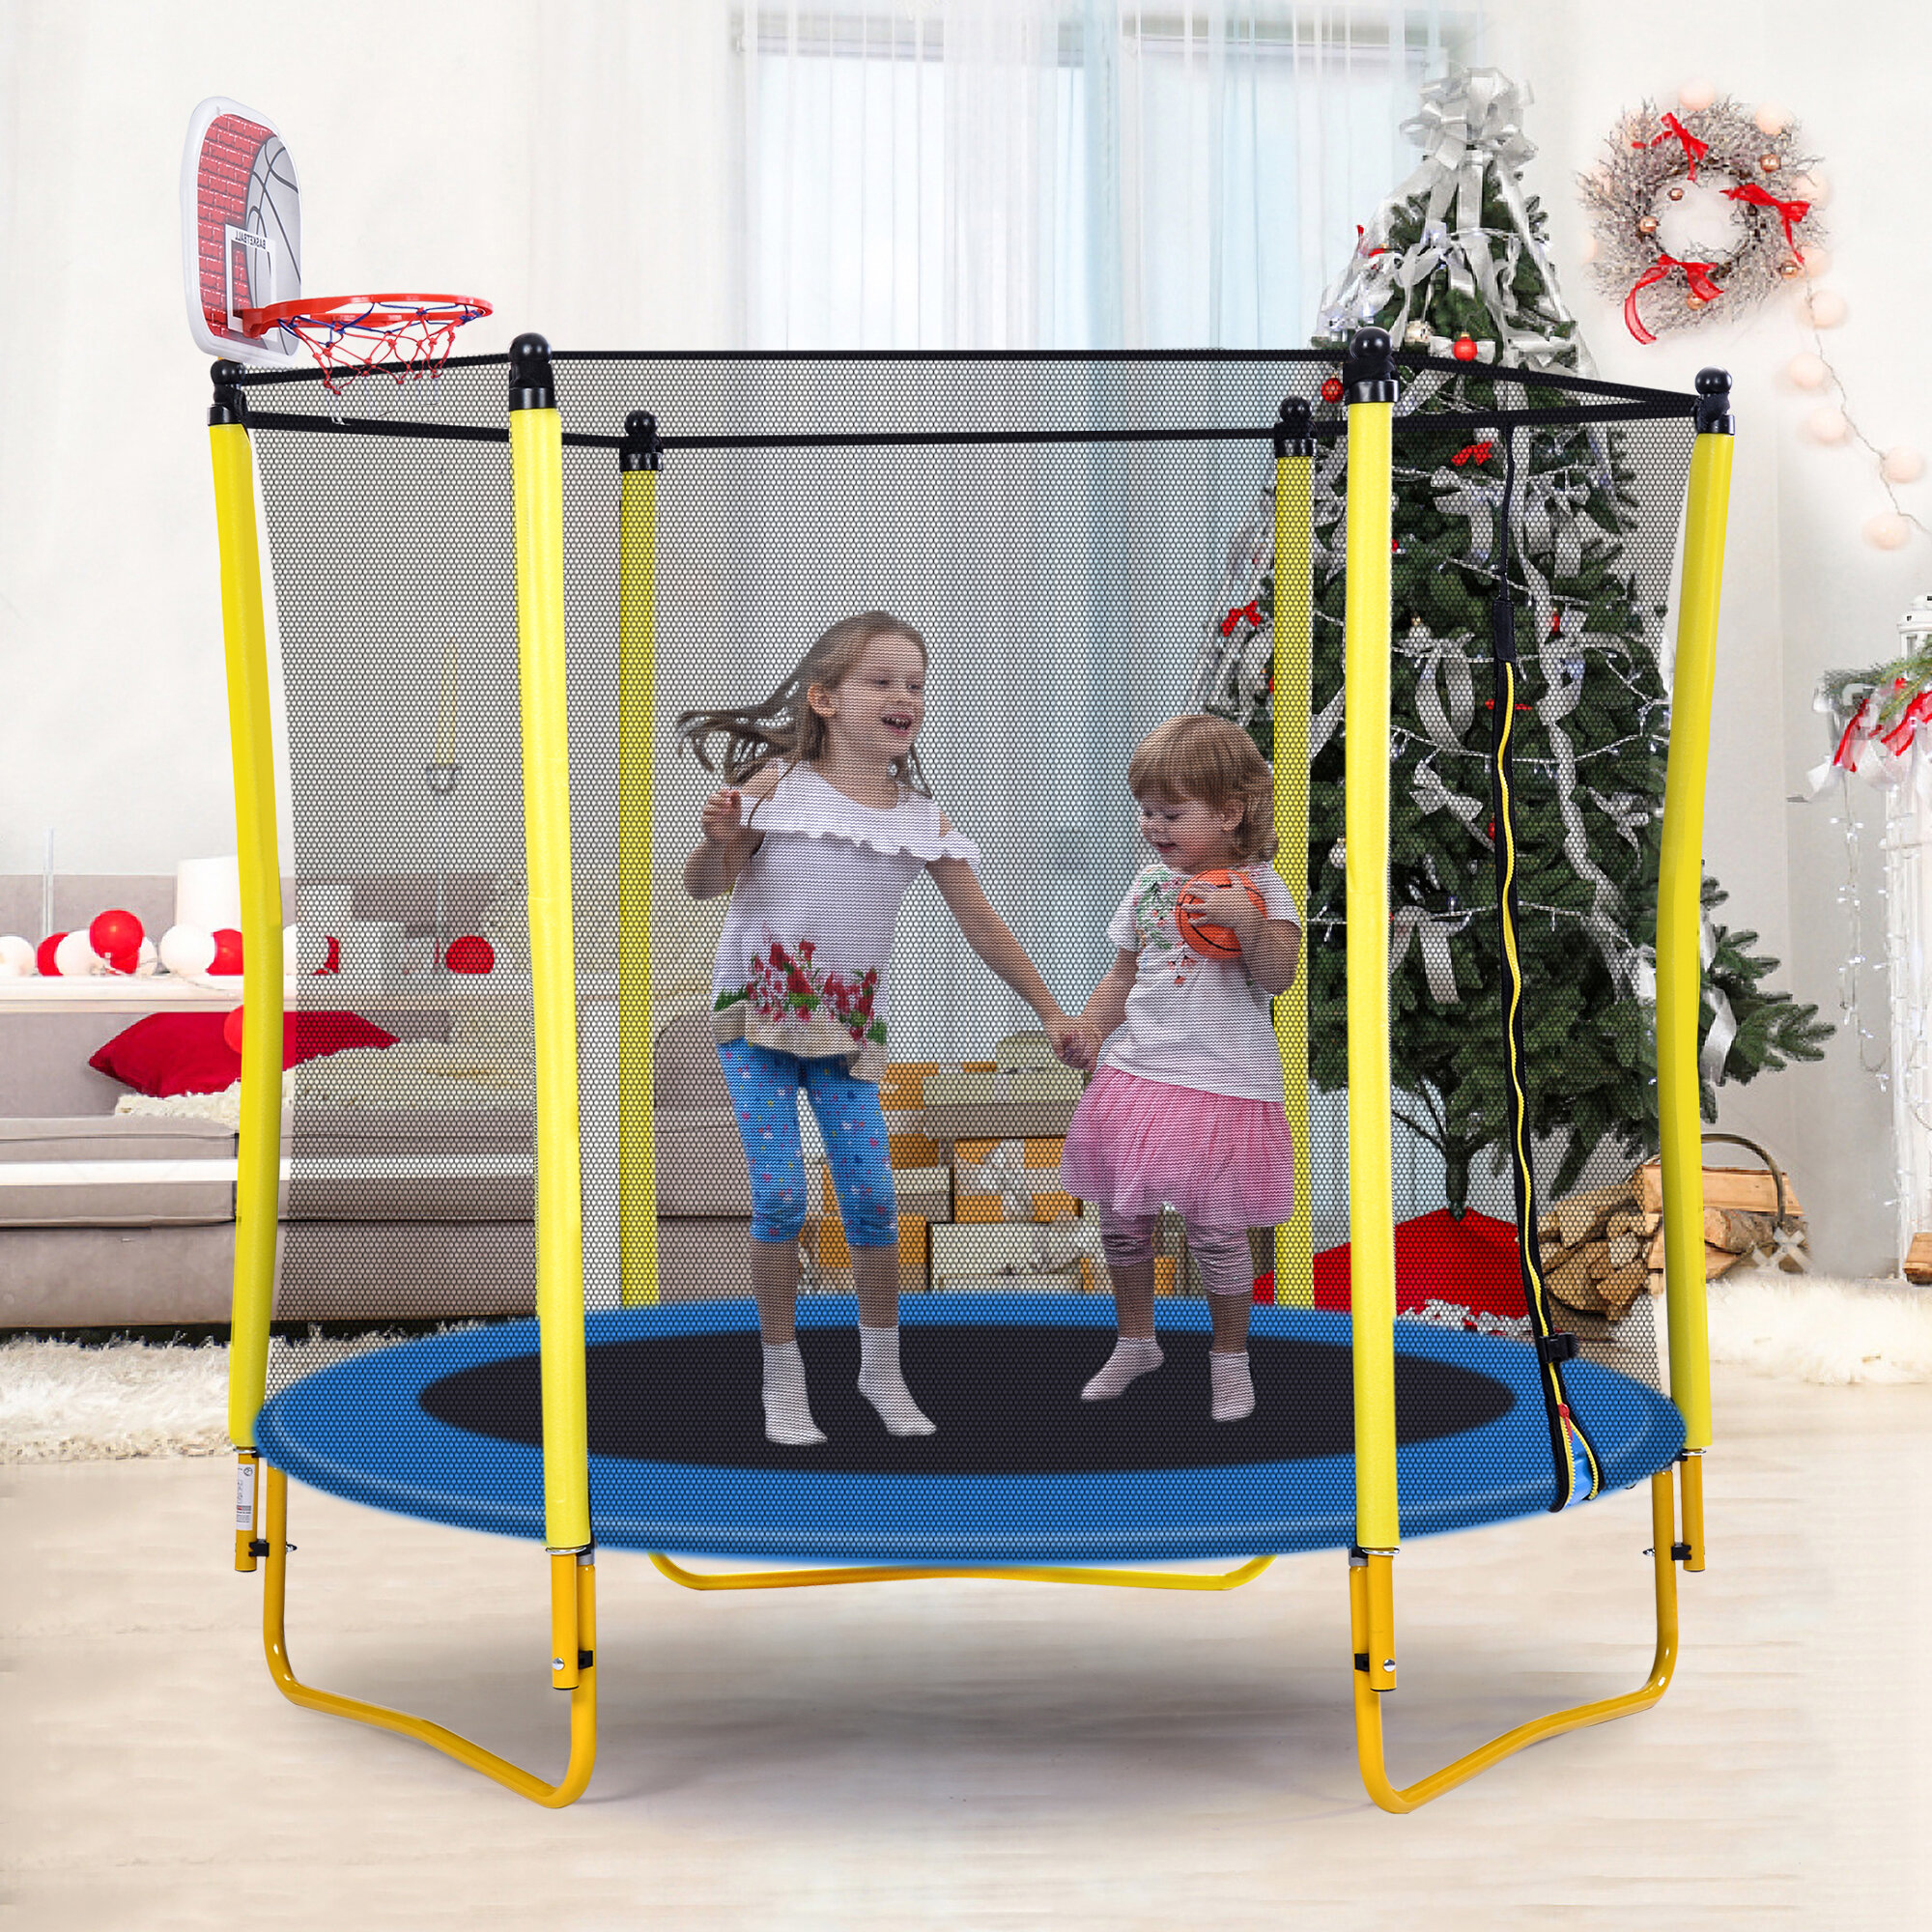 mooi Soms soms Effectiviteit Balight Trampoline For Kids Outdoor & Indoor Mini Trampoline With  Enclosure, Basketball Hoop And Ball ,5.5FT | Wayfair